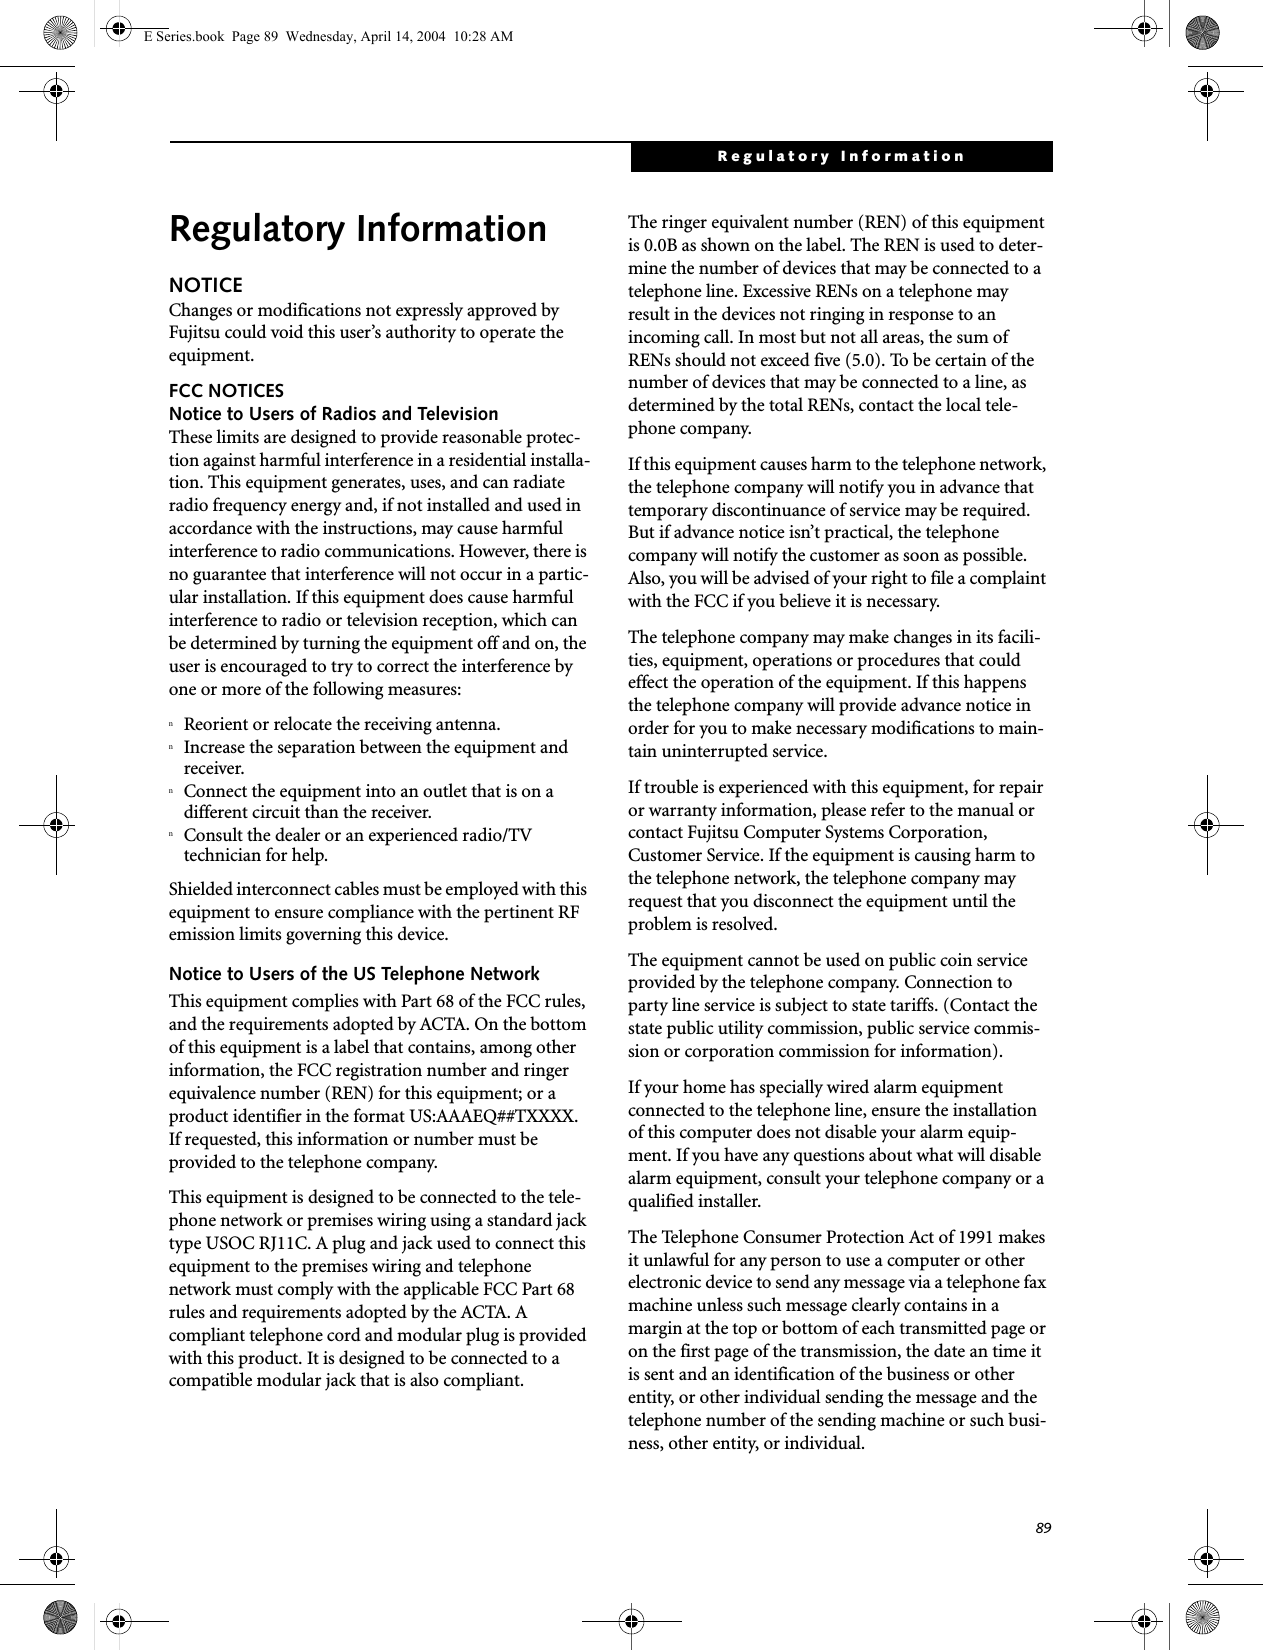 89Regulatory InformationRegulatory InformationNOTICEChanges or modifications not expressly approved by Fujitsu could void this user’s authority to operate the equipment.FCC NOTICESNotice to Users of Radios and TelevisionThese limits are designed to provide reasonable protec-tion against harmful interference in a residential installa-tion. This equipment generates, uses, and can radiate radio frequency energy and, if not installed and used in accordance with the instructions, may cause harmful interference to radio communications. However, there is no guarantee that interference will not occur in a partic-ular installation. If this equipment does cause harmful interference to radio or television reception, which can be determined by turning the equipment off and on, the user is encouraged to try to correct the interference by one or more of the following measures:nReorient or relocate the receiving antenna.nIncrease the separation between the equipment and receiver.nConnect the equipment into an outlet that is on a different circuit than the receiver.nConsult the dealer or an experienced radio/TVtechnician for help.Shielded interconnect cables must be employed with this equipment to ensure compliance with the pertinent RF emission limits governing this device. Notice to Users of the US Telephone NetworkThis equipment complies with Part 68 of the FCC rules, and the requirements adopted by ACTA. On the bottom of this equipment is a label that contains, among other information, the FCC registration number and ringer equivalence number (REN) for this equipment; or a product identifier in the format US:AAAEQ##TXXXX. If requested, this information or number must be provided to the telephone company.This equipment is designed to be connected to the tele-phone network or premises wiring using a standard jack type USOC RJ11C. A plug and jack used to connect this equipment to the premises wiring and telephone network must comply with the applicable FCC Part 68 rules and requirements adopted by the ACTA. A compliant telephone cord and modular plug is provided with this product. It is designed to be connected to a compatible modular jack that is also compliant.The ringer equivalent number (REN) of this equipment is 0.0B as shown on the label. The REN is used to deter-mine the number of devices that may be connected to a telephone line. Excessive RENs on a telephone may result in the devices not ringing in response to an incoming call. In most but not all areas, the sum of RENs should not exceed five (5.0). To be certain of the number of devices that may be connected to a line, as determined by the total RENs, contact the local tele-phone company. If this equipment causes harm to the telephone network, the telephone company will notify you in advance that temporary discontinuance of service may be required. But if advance notice isn’t practical, the telephone company will notify the customer as soon as possible. Also, you will be advised of your right to file a complaint with the FCC if you believe it is necessary.The telephone company may make changes in its facili-ties, equipment, operations or procedures that could effect the operation of the equipment. If this happens the telephone company will provide advance notice in order for you to make necessary modifications to main-tain uninterrupted service. If trouble is experienced with this equipment, for repair or warranty information, please refer to the manual or contact Fujitsu Computer Systems Corporation, Customer Service. If the equipment is causing harm to the telephone network, the telephone company may request that you disconnect the equipment until the problem is resolved.The equipment cannot be used on public coin service provided by the telephone company. Connection to party line service is subject to state tariffs. (Contact the state public utility commission, public service commis-sion or corporation commission for information). If your home has specially wired alarm equipment connected to the telephone line, ensure the installation of this computer does not disable your alarm equip-ment. If you have any questions about what will disable alarm equipment, consult your telephone company or a qualified installer.The Telephone Consumer Protection Act of 1991 makes it unlawful for any person to use a computer or other electronic device to send any message via a telephone fax machine unless such message clearly contains in a margin at the top or bottom of each transmitted page or on the first page of the transmission, the date an time it is sent and an identification of the business or other entity, or other individual sending the message and the telephone number of the sending machine or such busi-ness, other entity, or individual.E Series.book  Page 89  Wednesday, April 14, 2004  10:28 AM